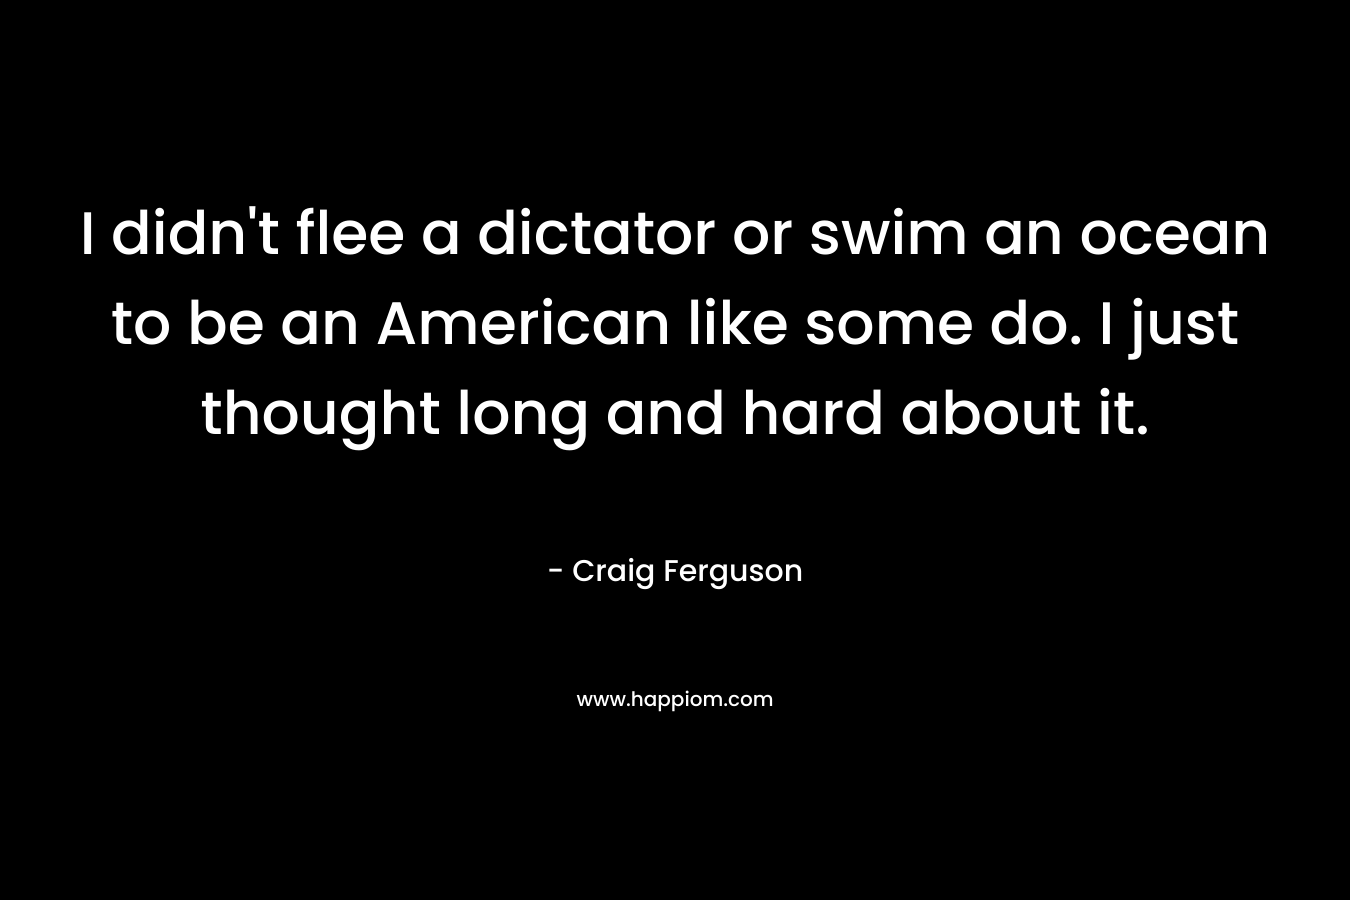 I didn’t flee a dictator or swim an ocean to be an American like some do. I just thought long and hard about it. – Craig Ferguson